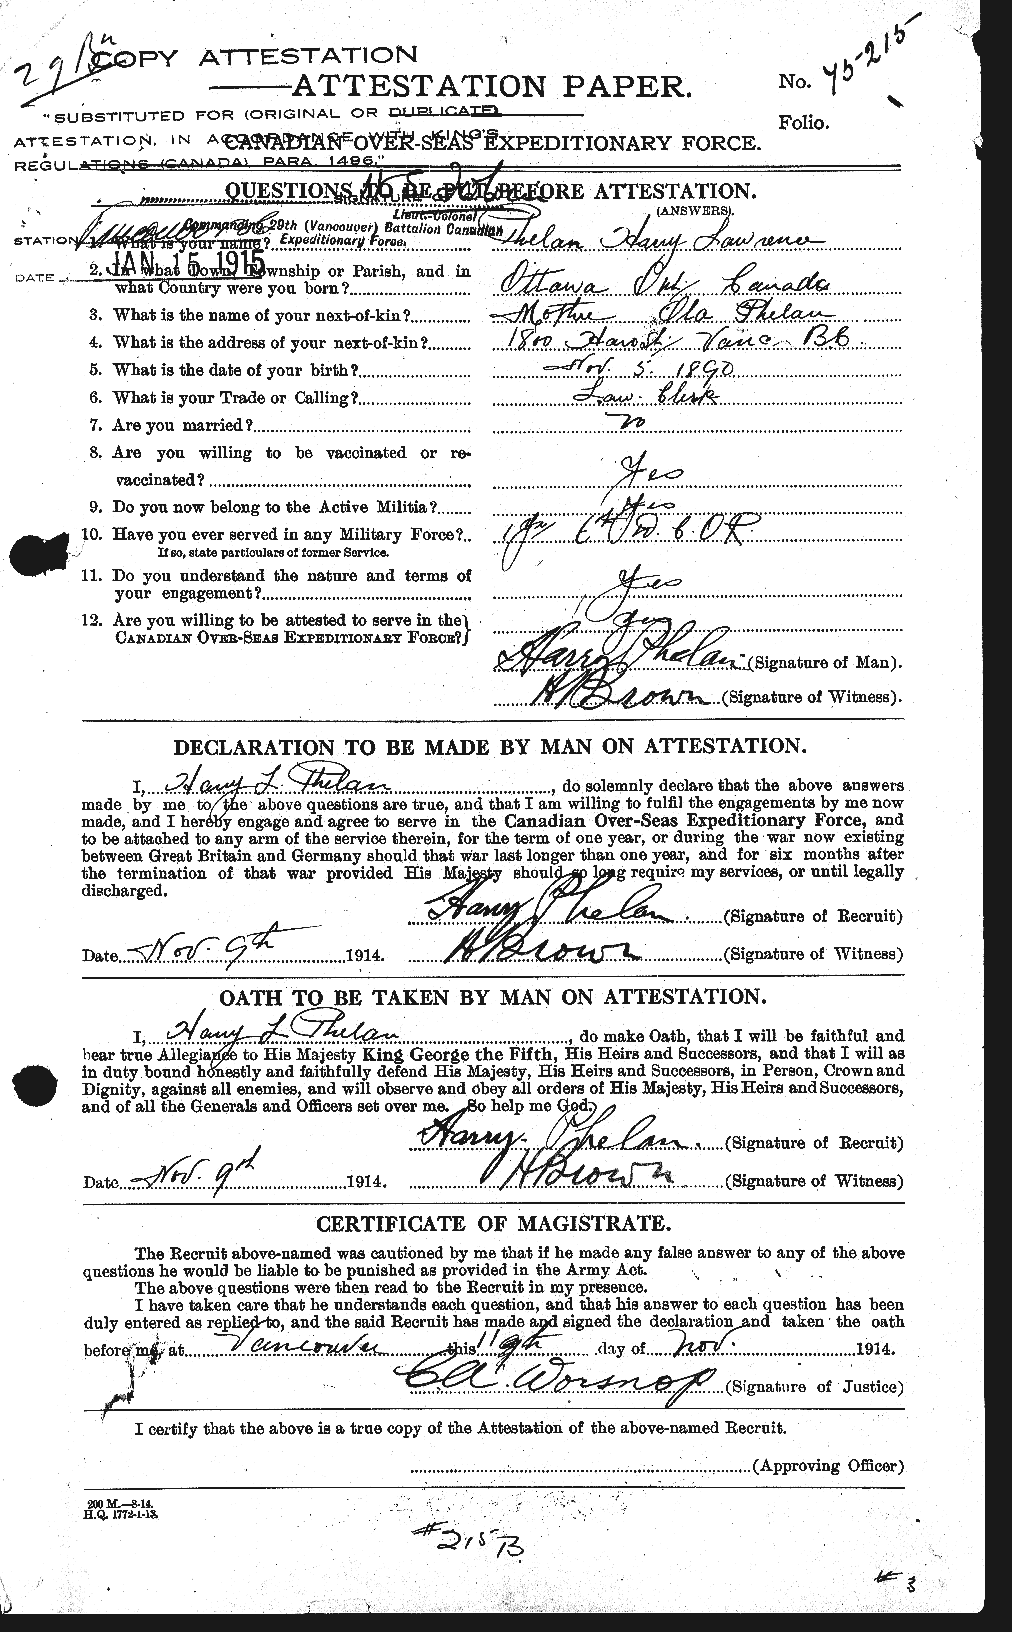 Personnel Records of the First World War - CEF 576950a